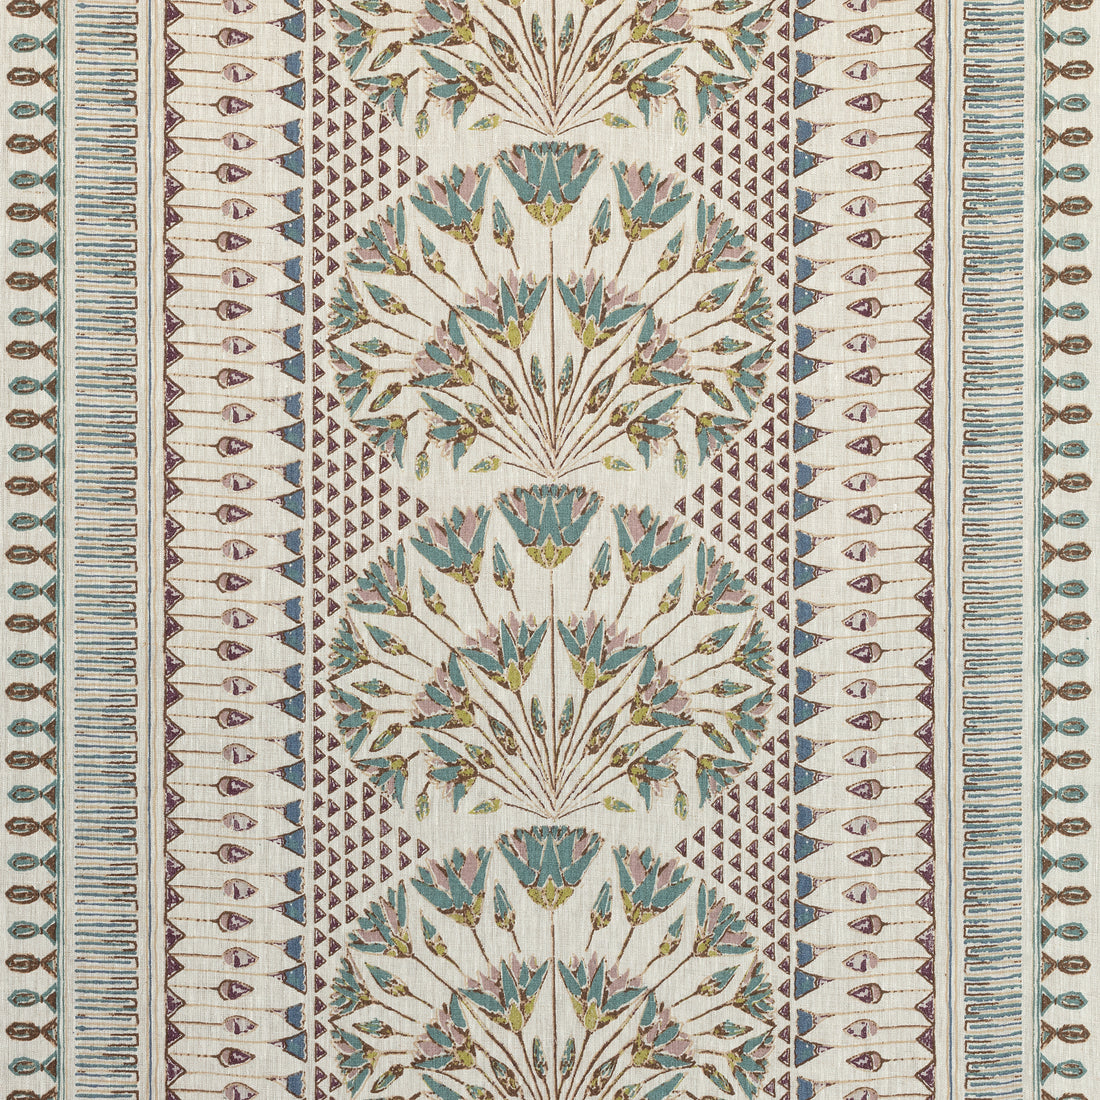 Cairo fabric in eggplant  color - pattern number AF9626 - by Anna French in the Savoy collection